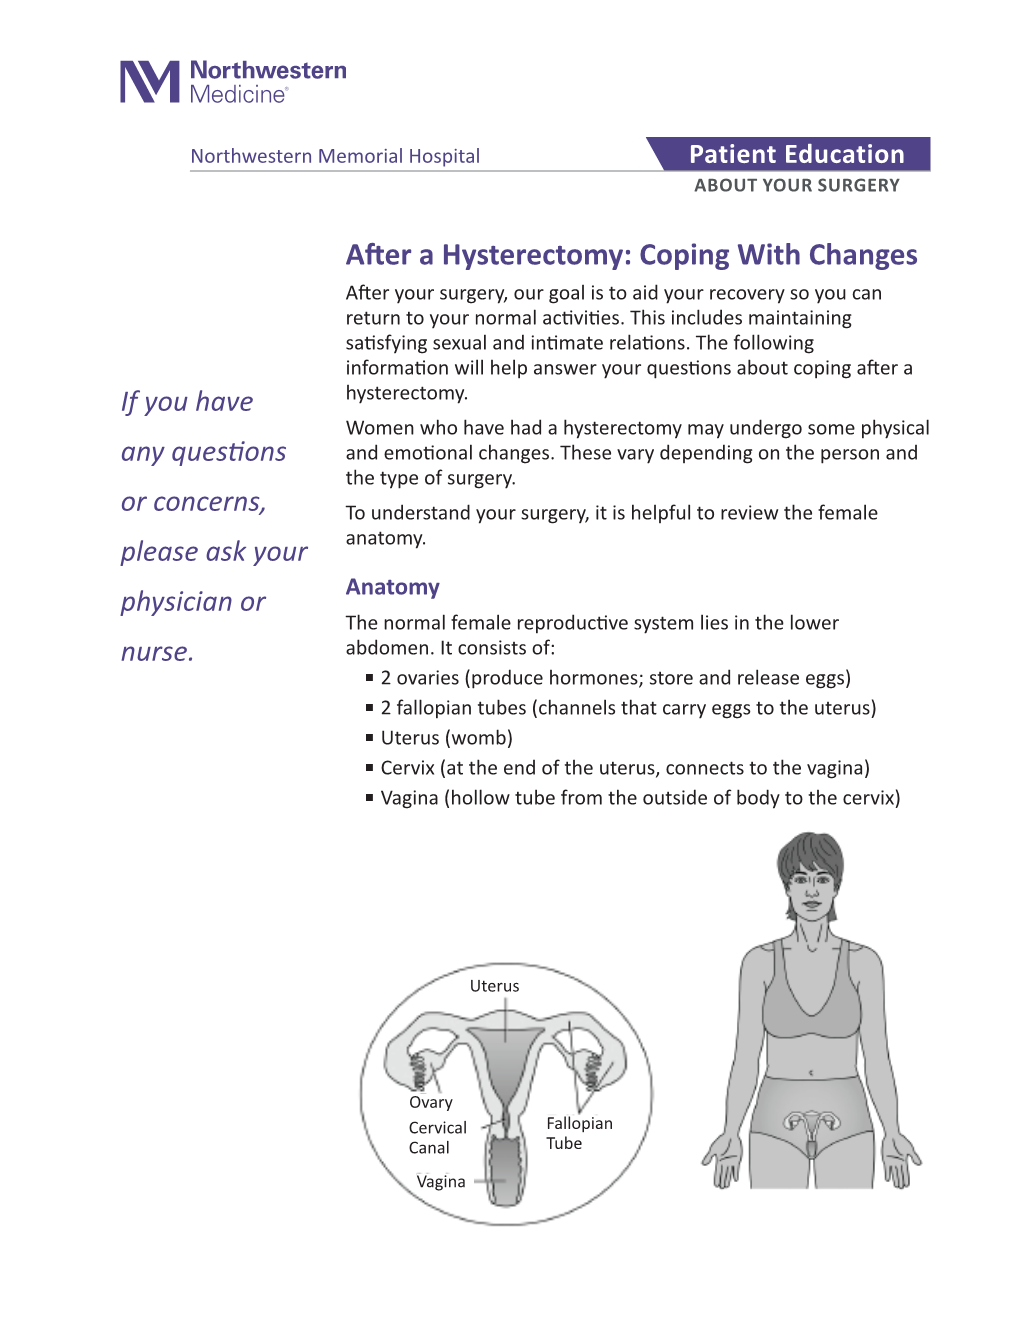 After a Hysterectomy: Coping with Changes After Your Surgery, Our Goal Is to Aid Your Recovery So You Can Return to Your Normal Activities